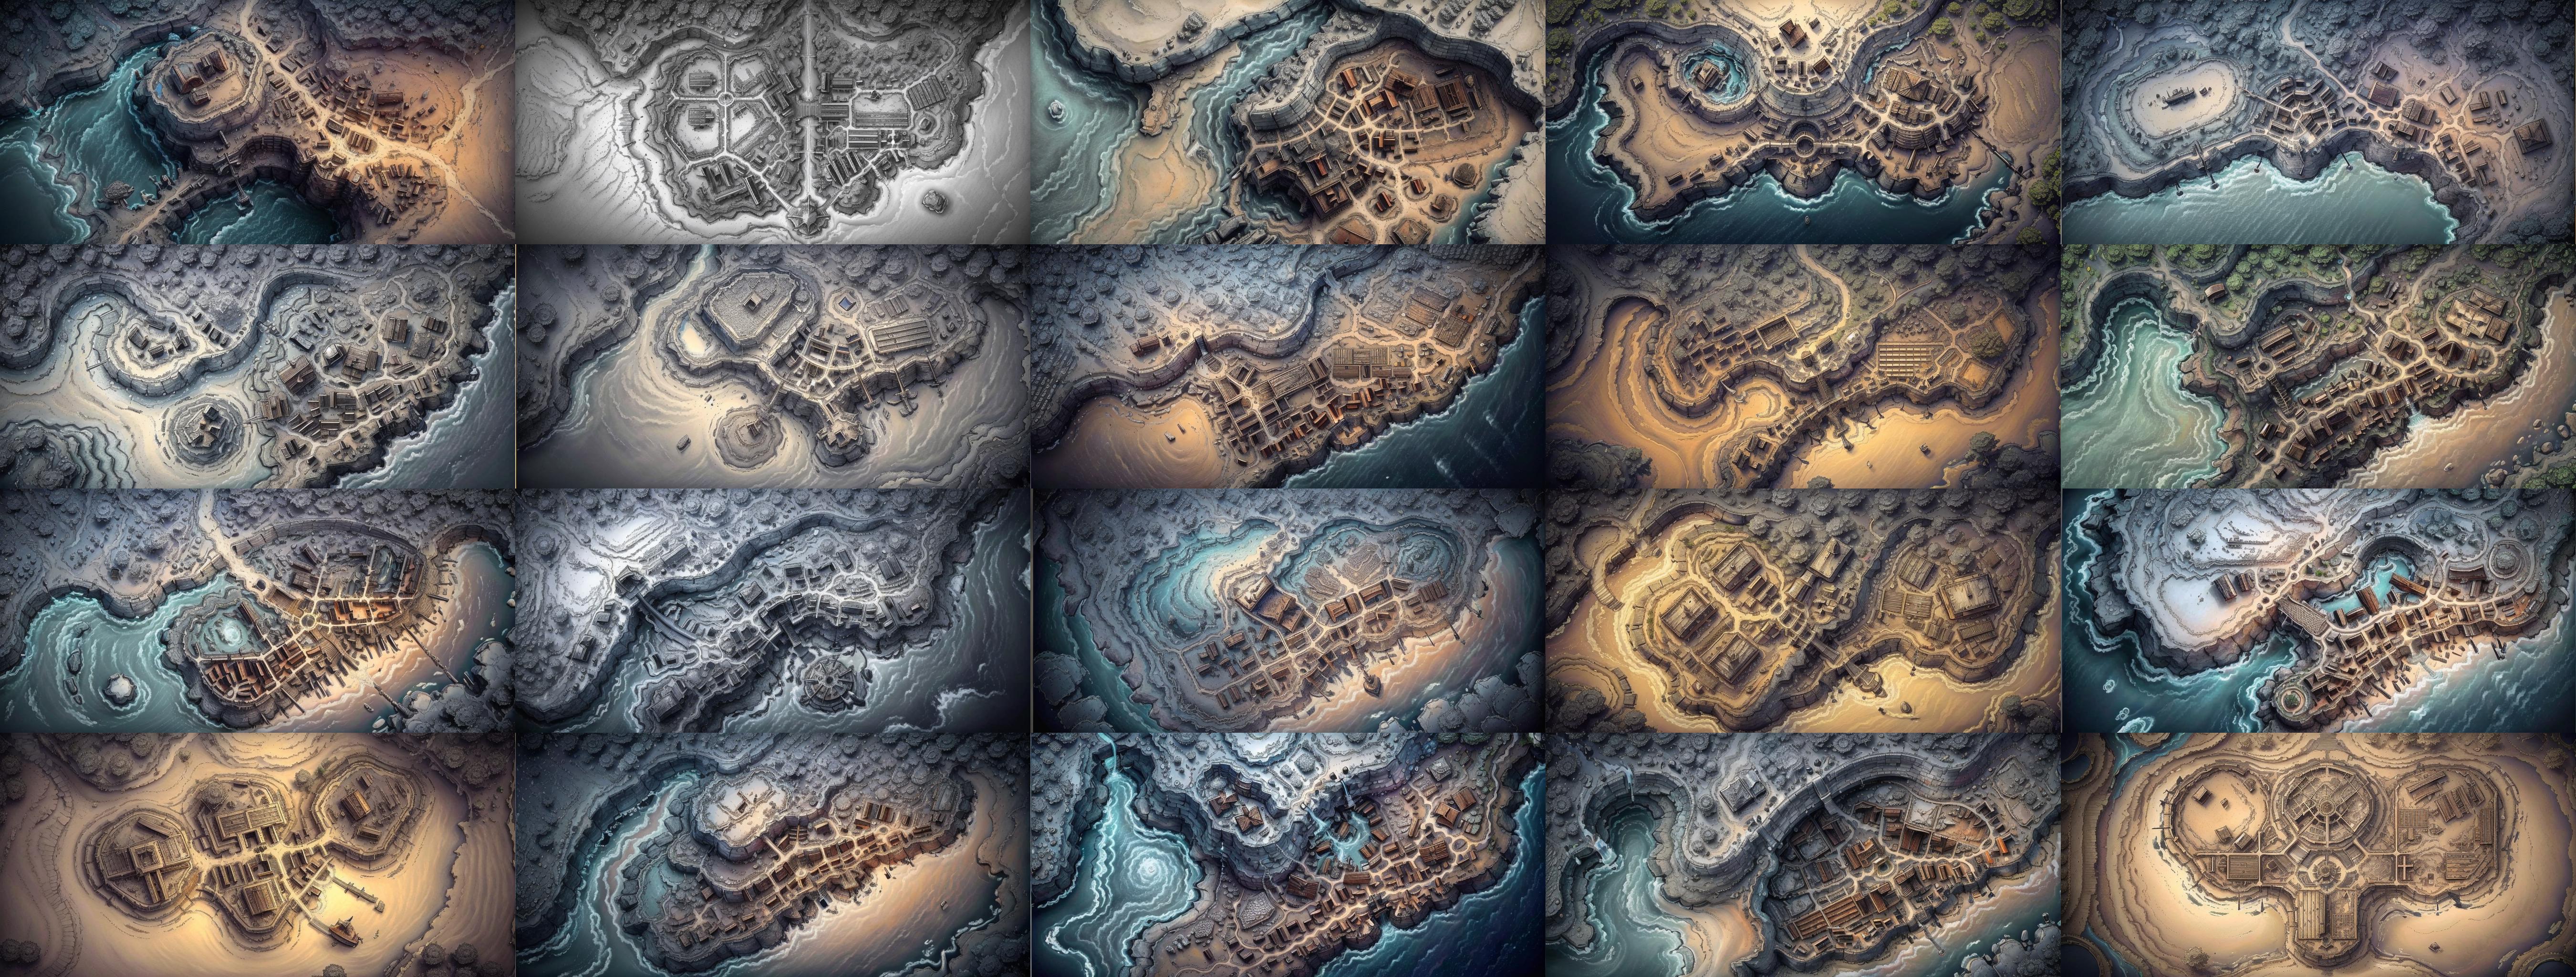 Table Rpg / D&D Maps #10 - Cities image by Tomas_Aguilar